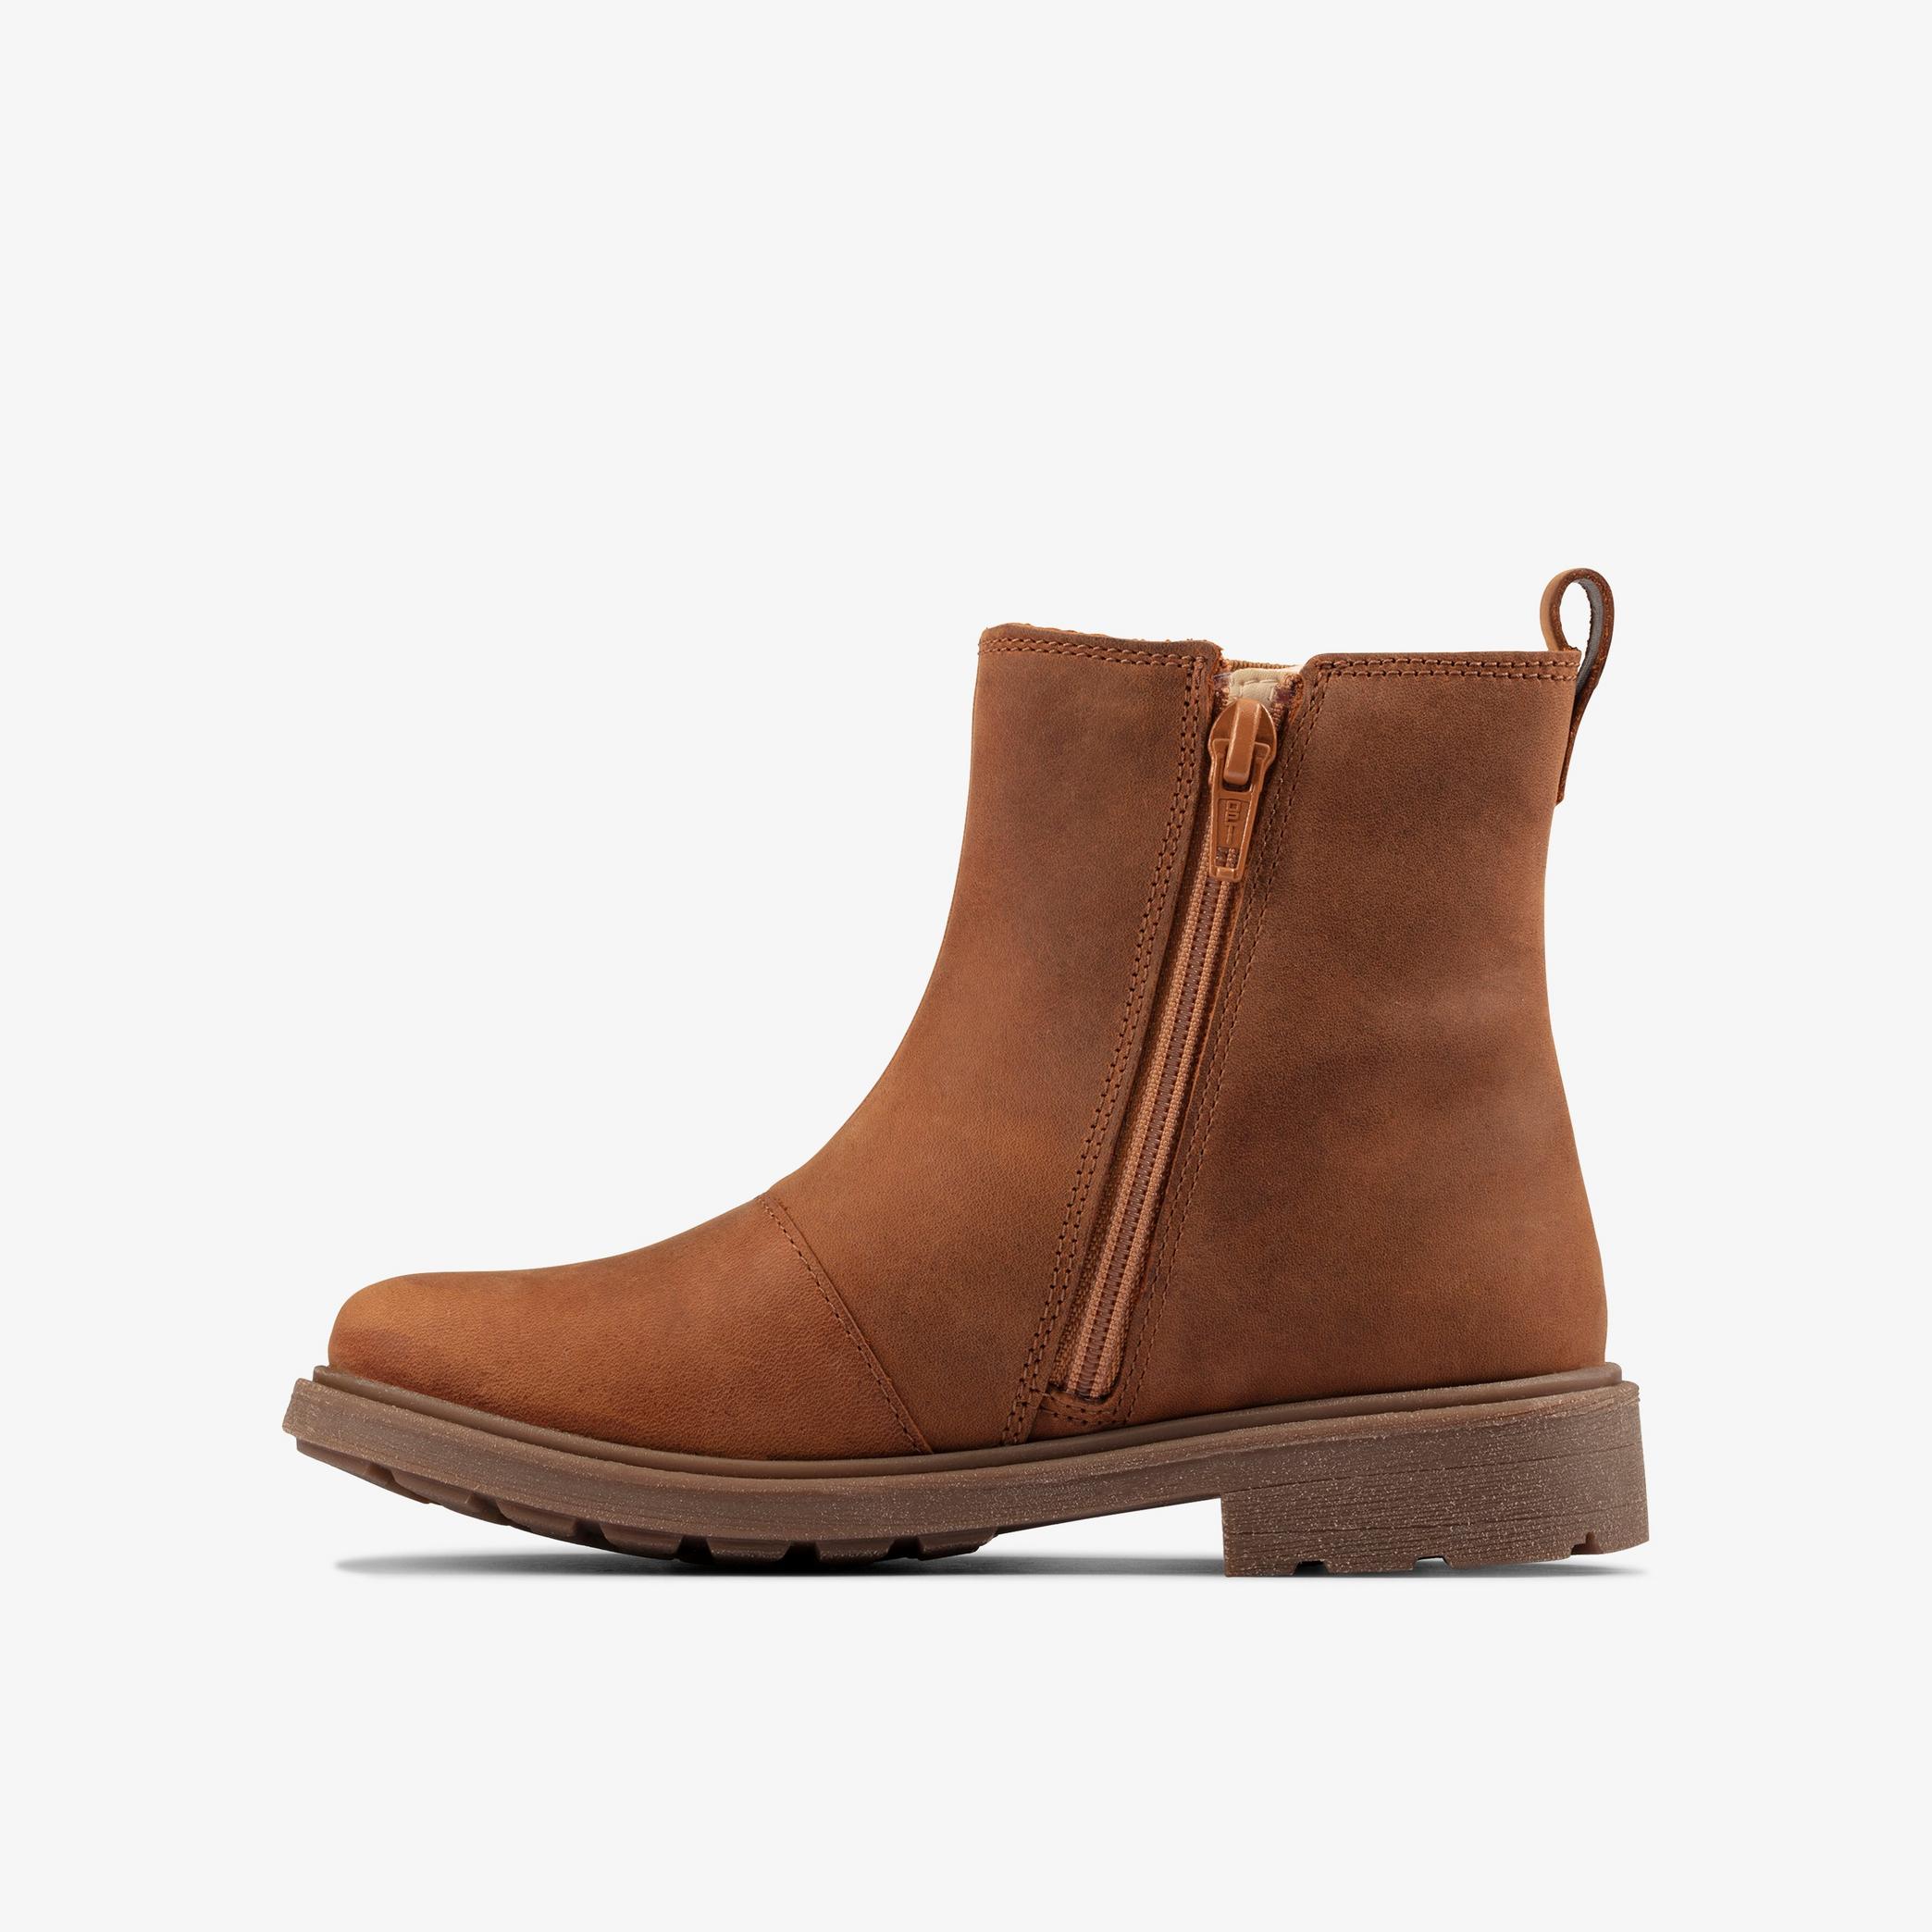 Astrol Orin Toddler Tan Leather Chelsea Boots, view 2 of 6